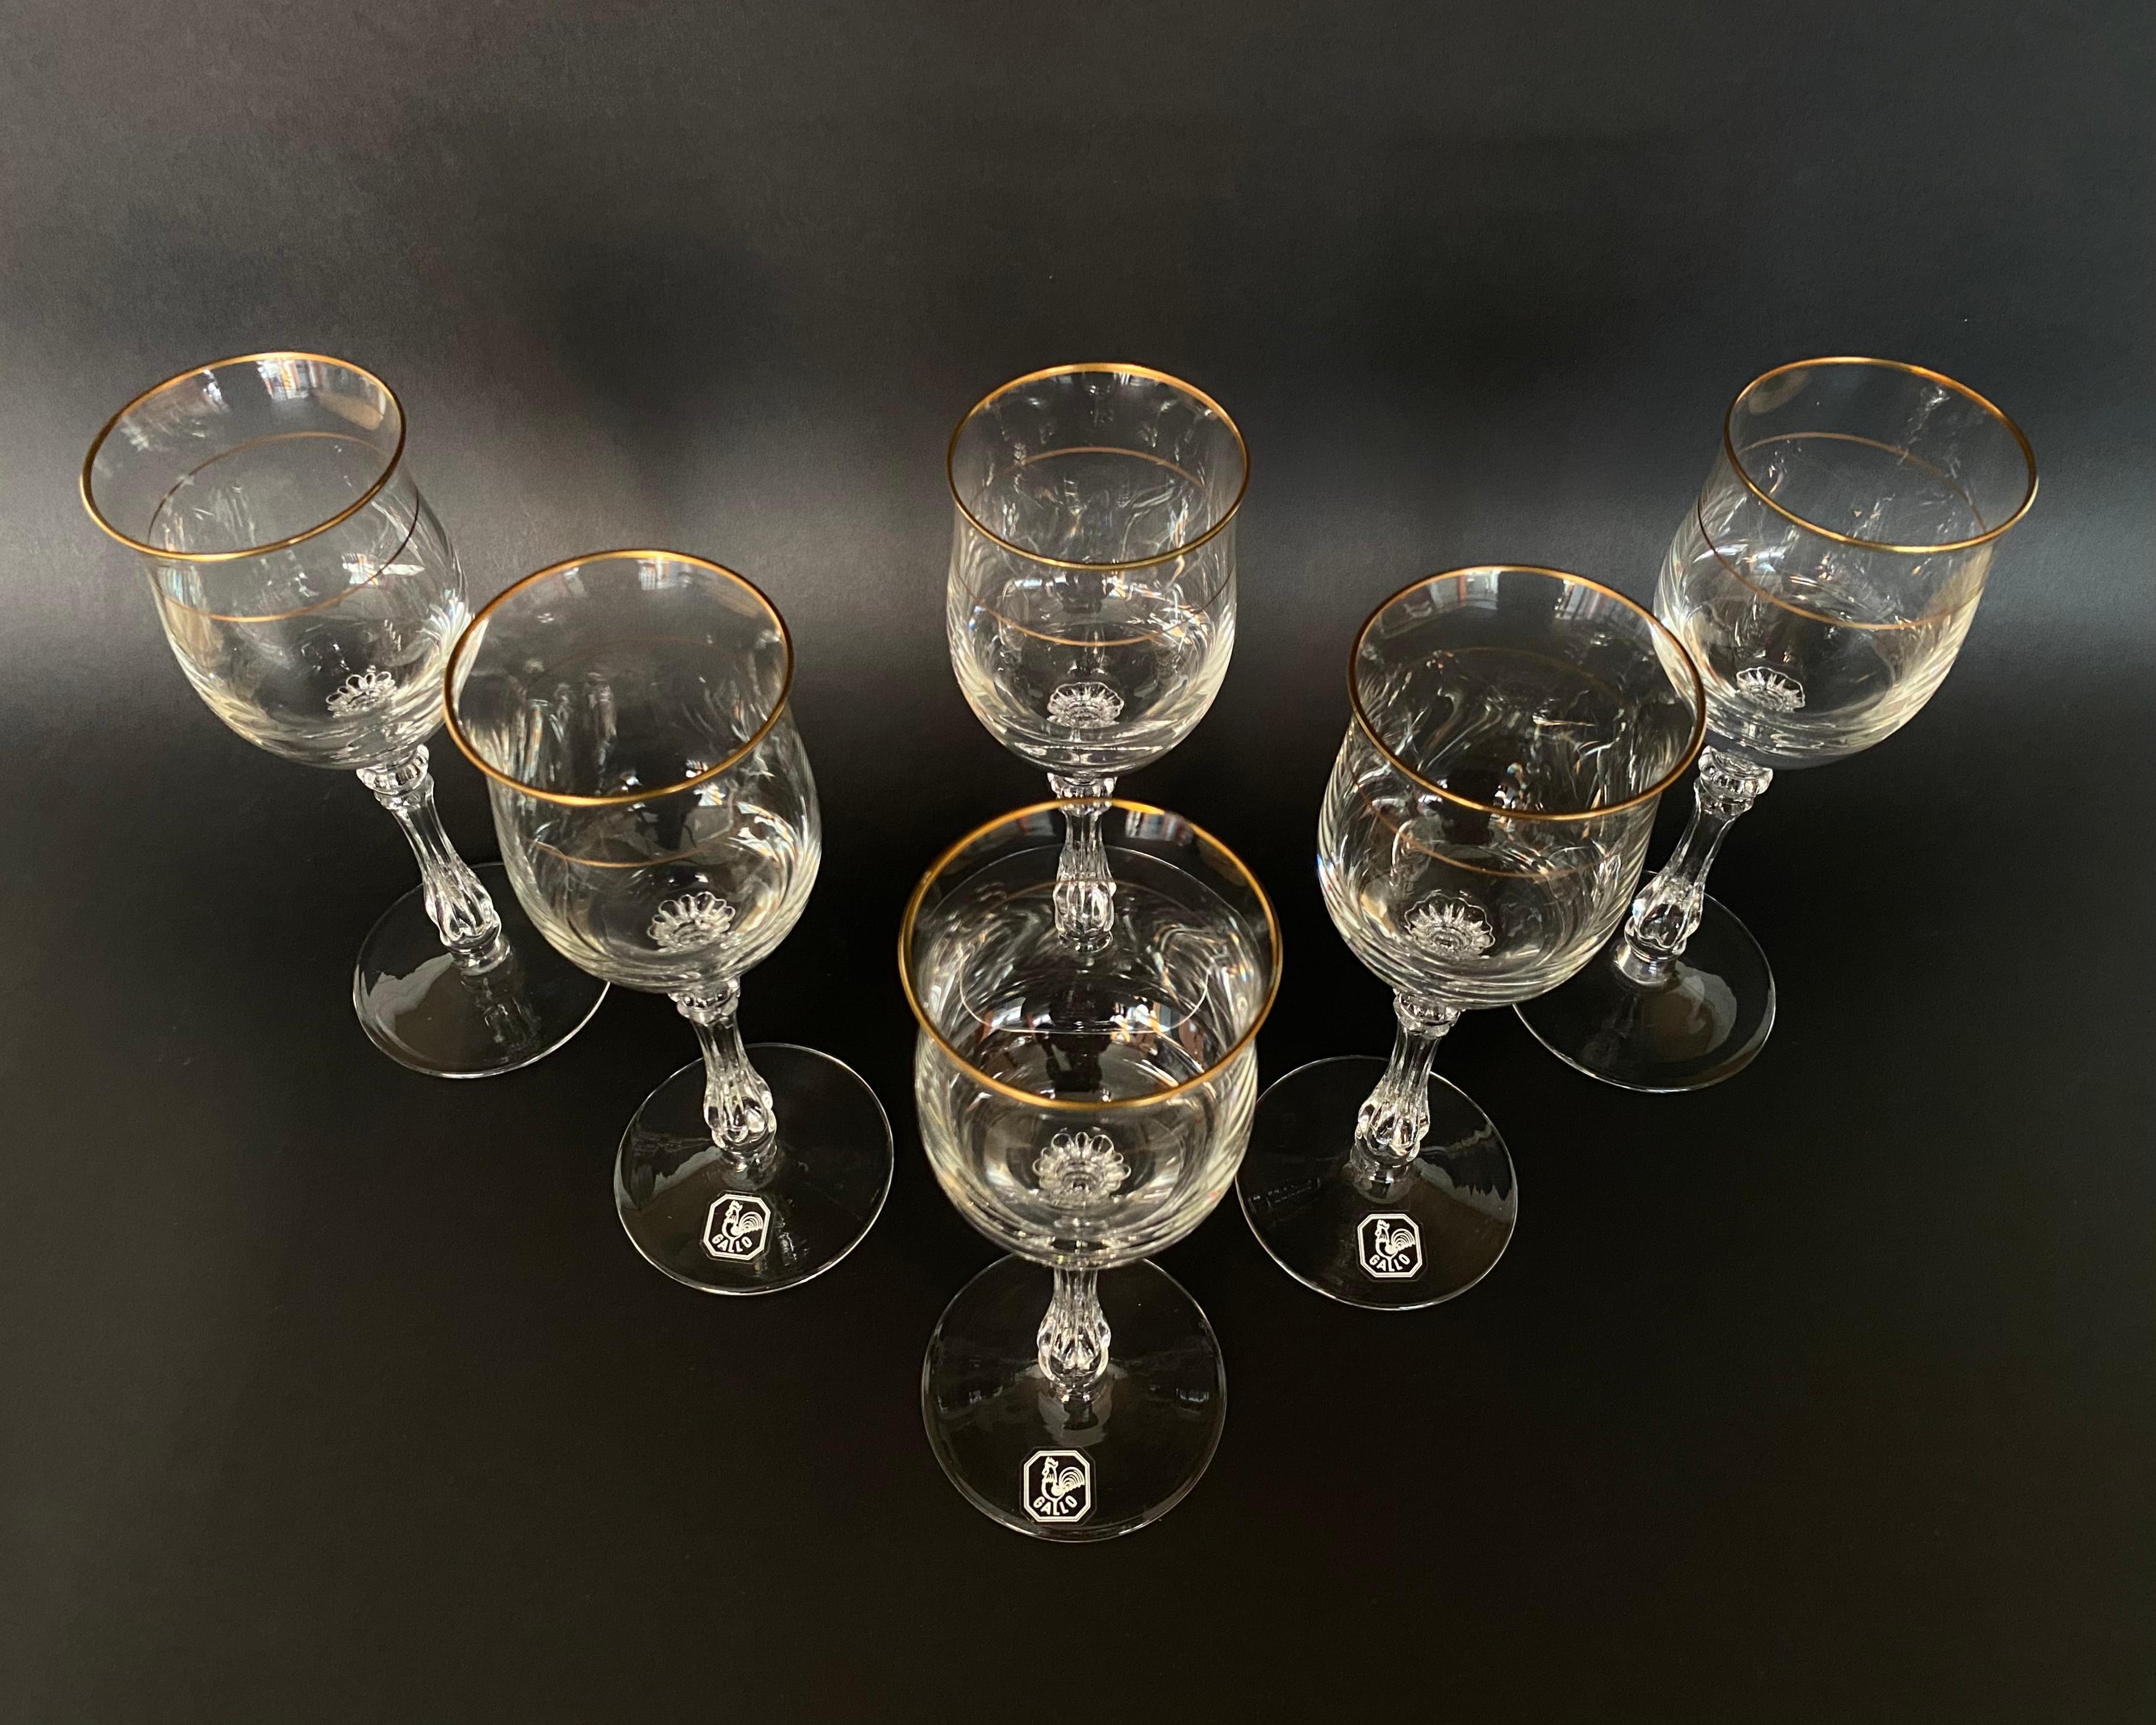 Charming Vintage Set of 6 Crystal Cognac Glasses by Gallo, Germany, 1970s For Sale 1